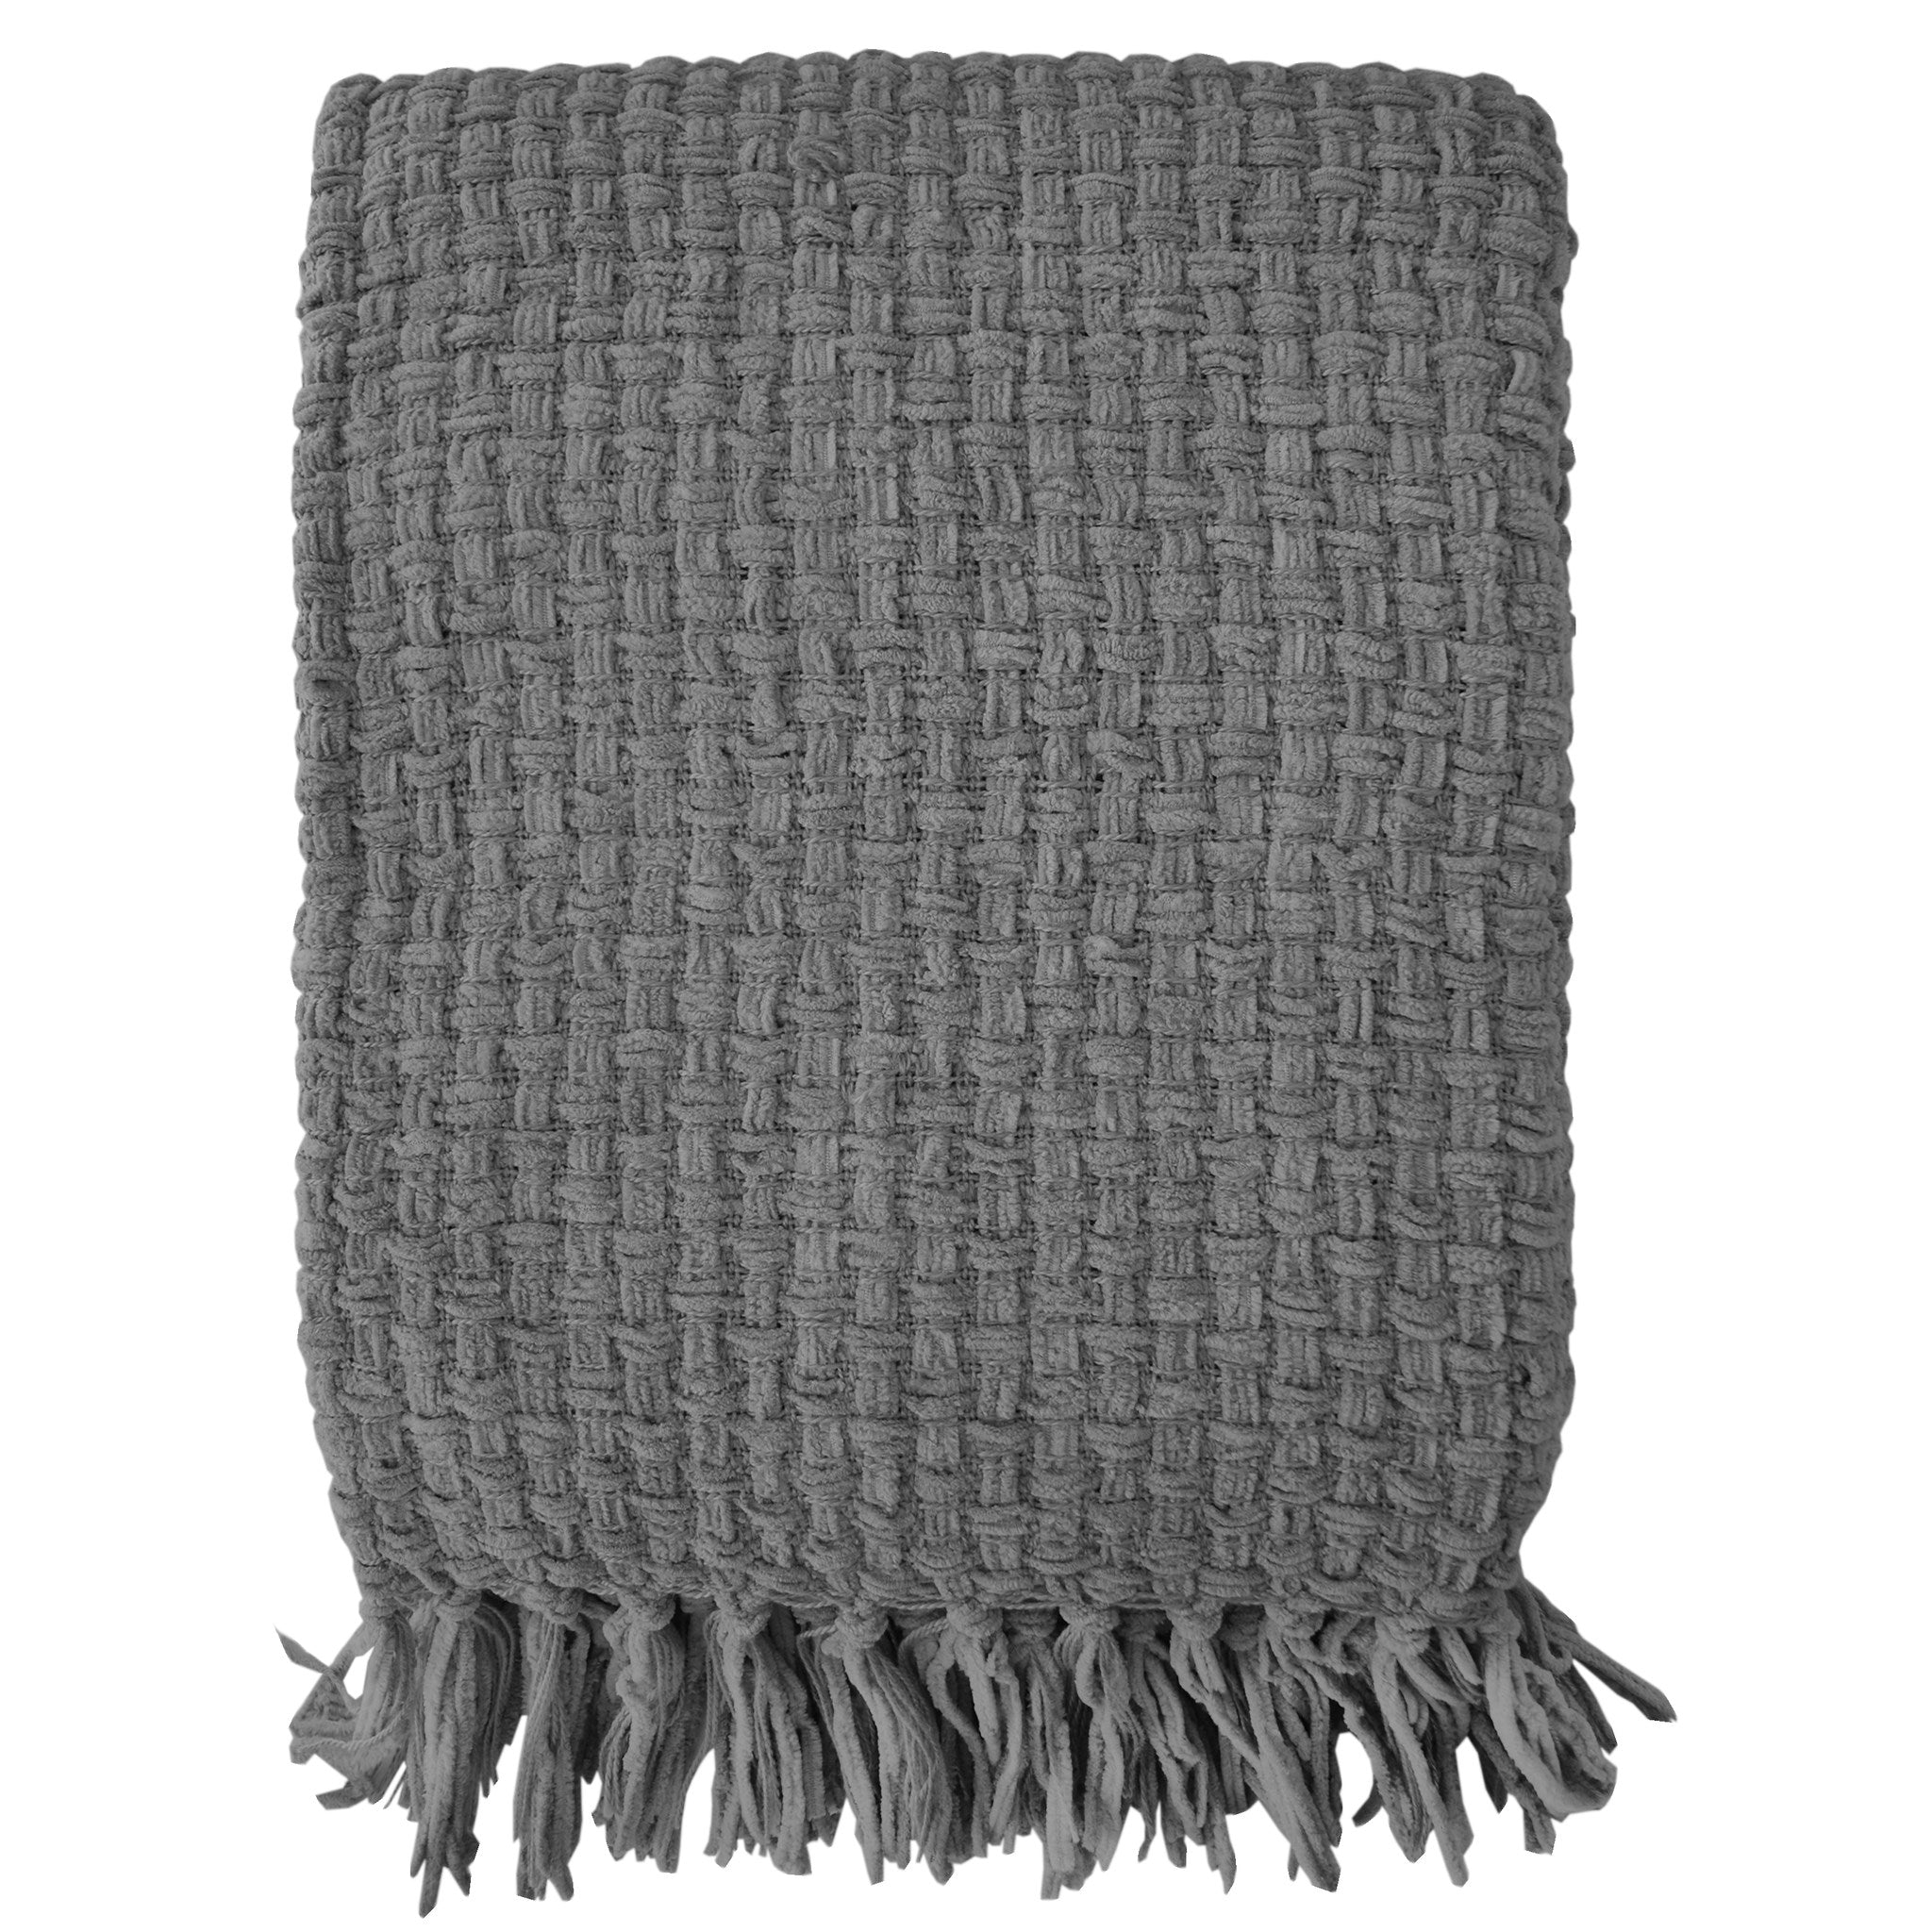 Basket Weave Throws- 5 Colours